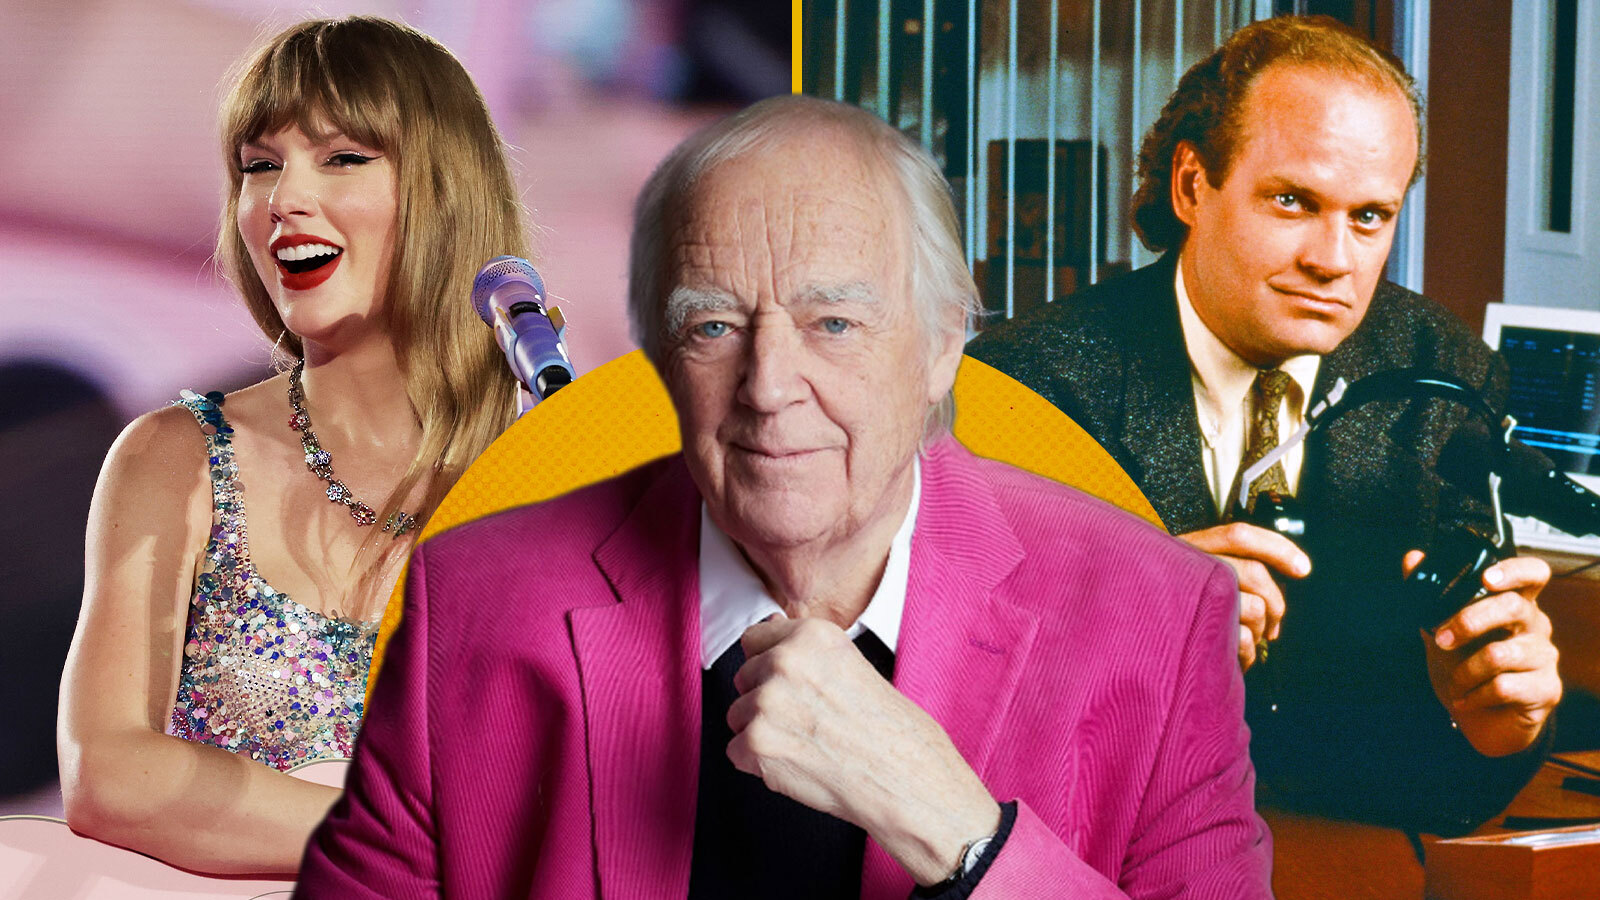 Tim Rice: If Taylor Swift asked me out, I would say no